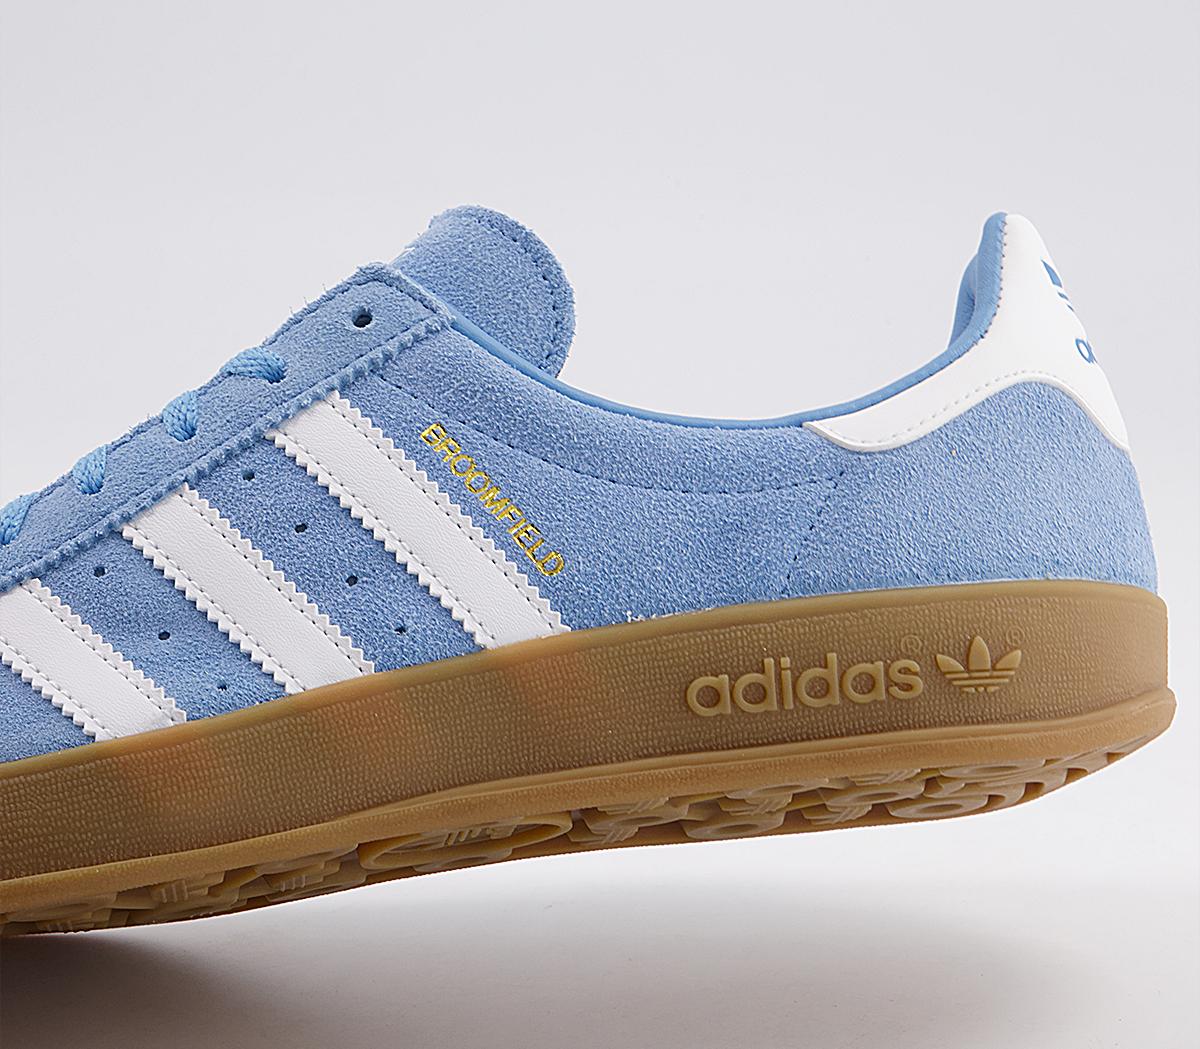 adidas Broomfield Trainers Light Blue White Gum - His trainers